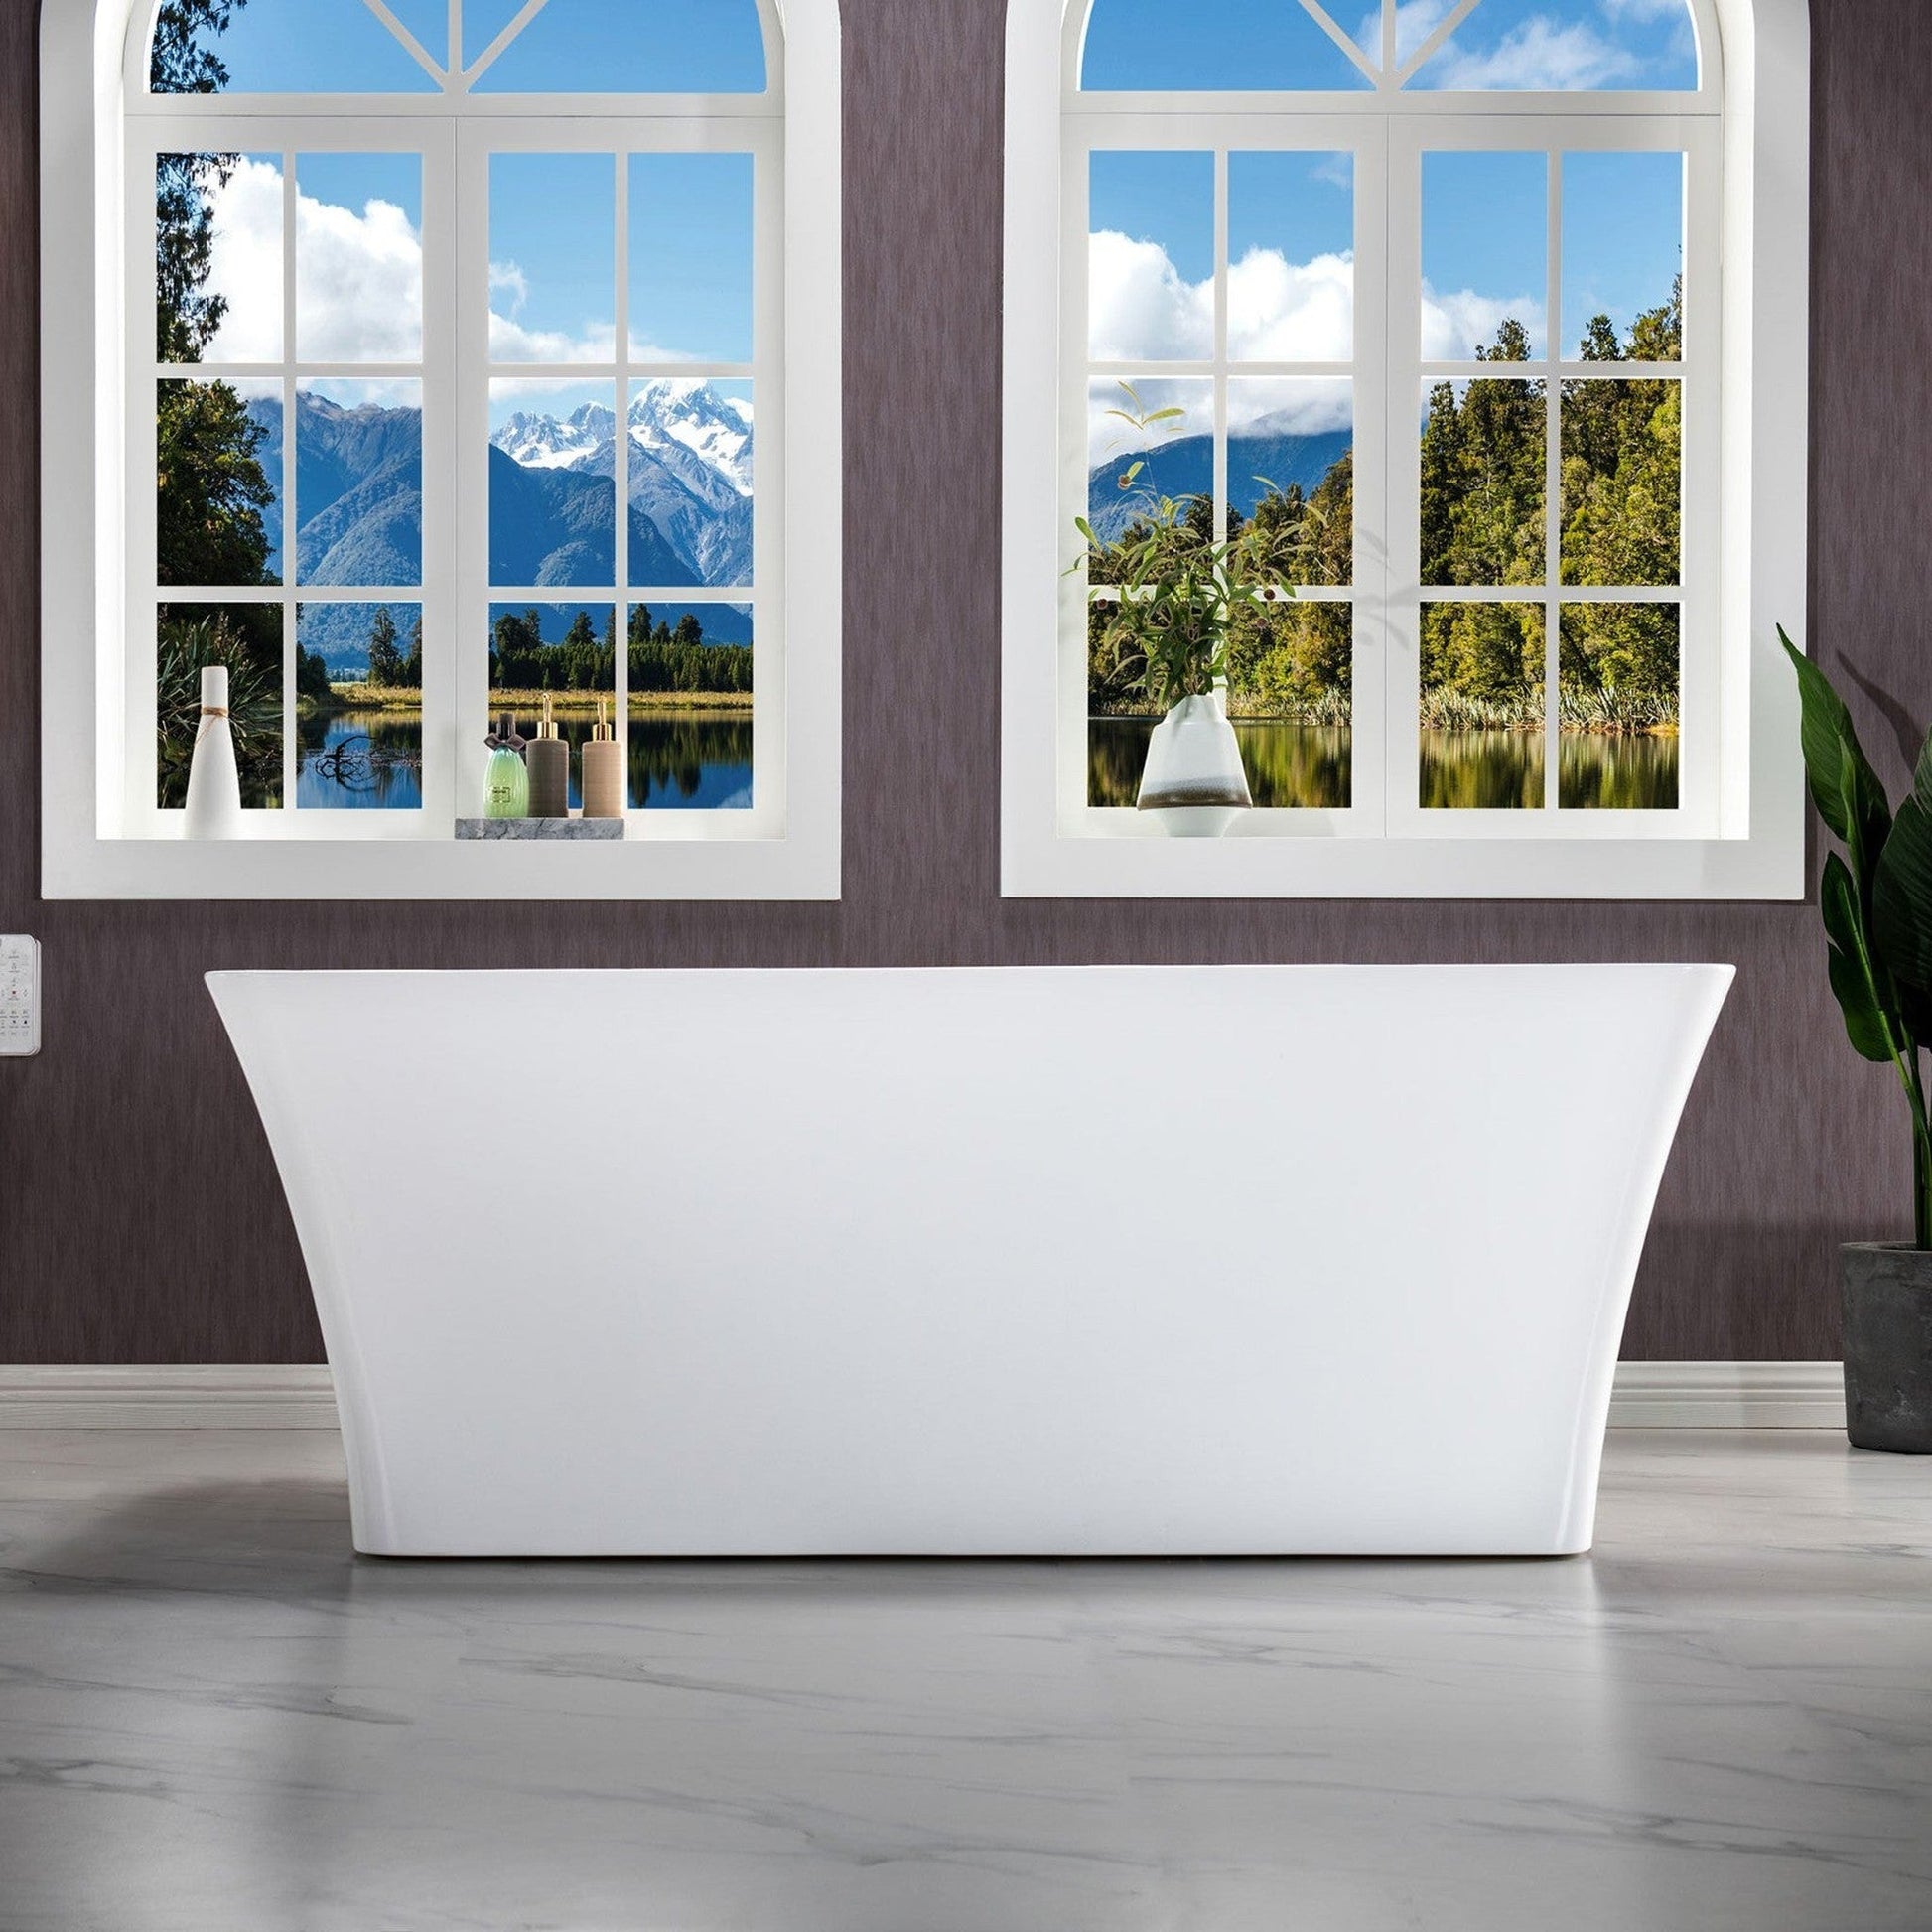 WoodBridge B-1509 59" White Acrylic Freestanding Soaking Bathtub With Brushed Gold Drain, Overflow, F0073BGVT Tub Filler and Caddy Tray